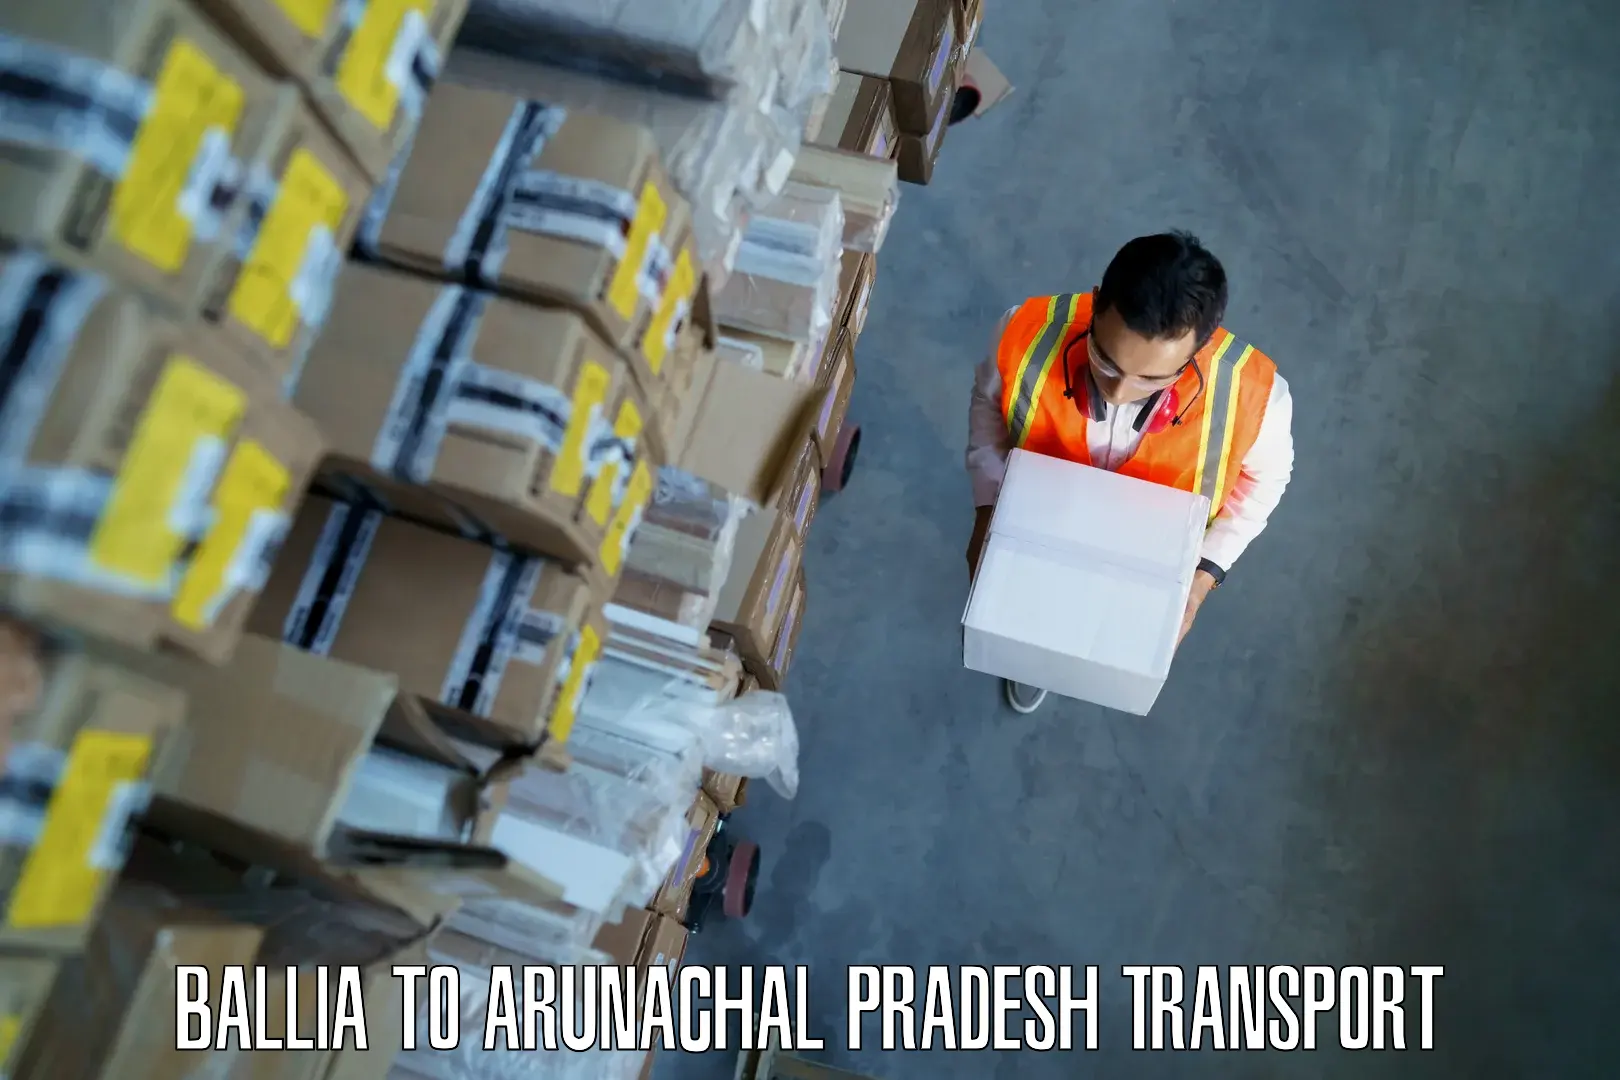 Daily parcel service transport Ballia to Yingkiong